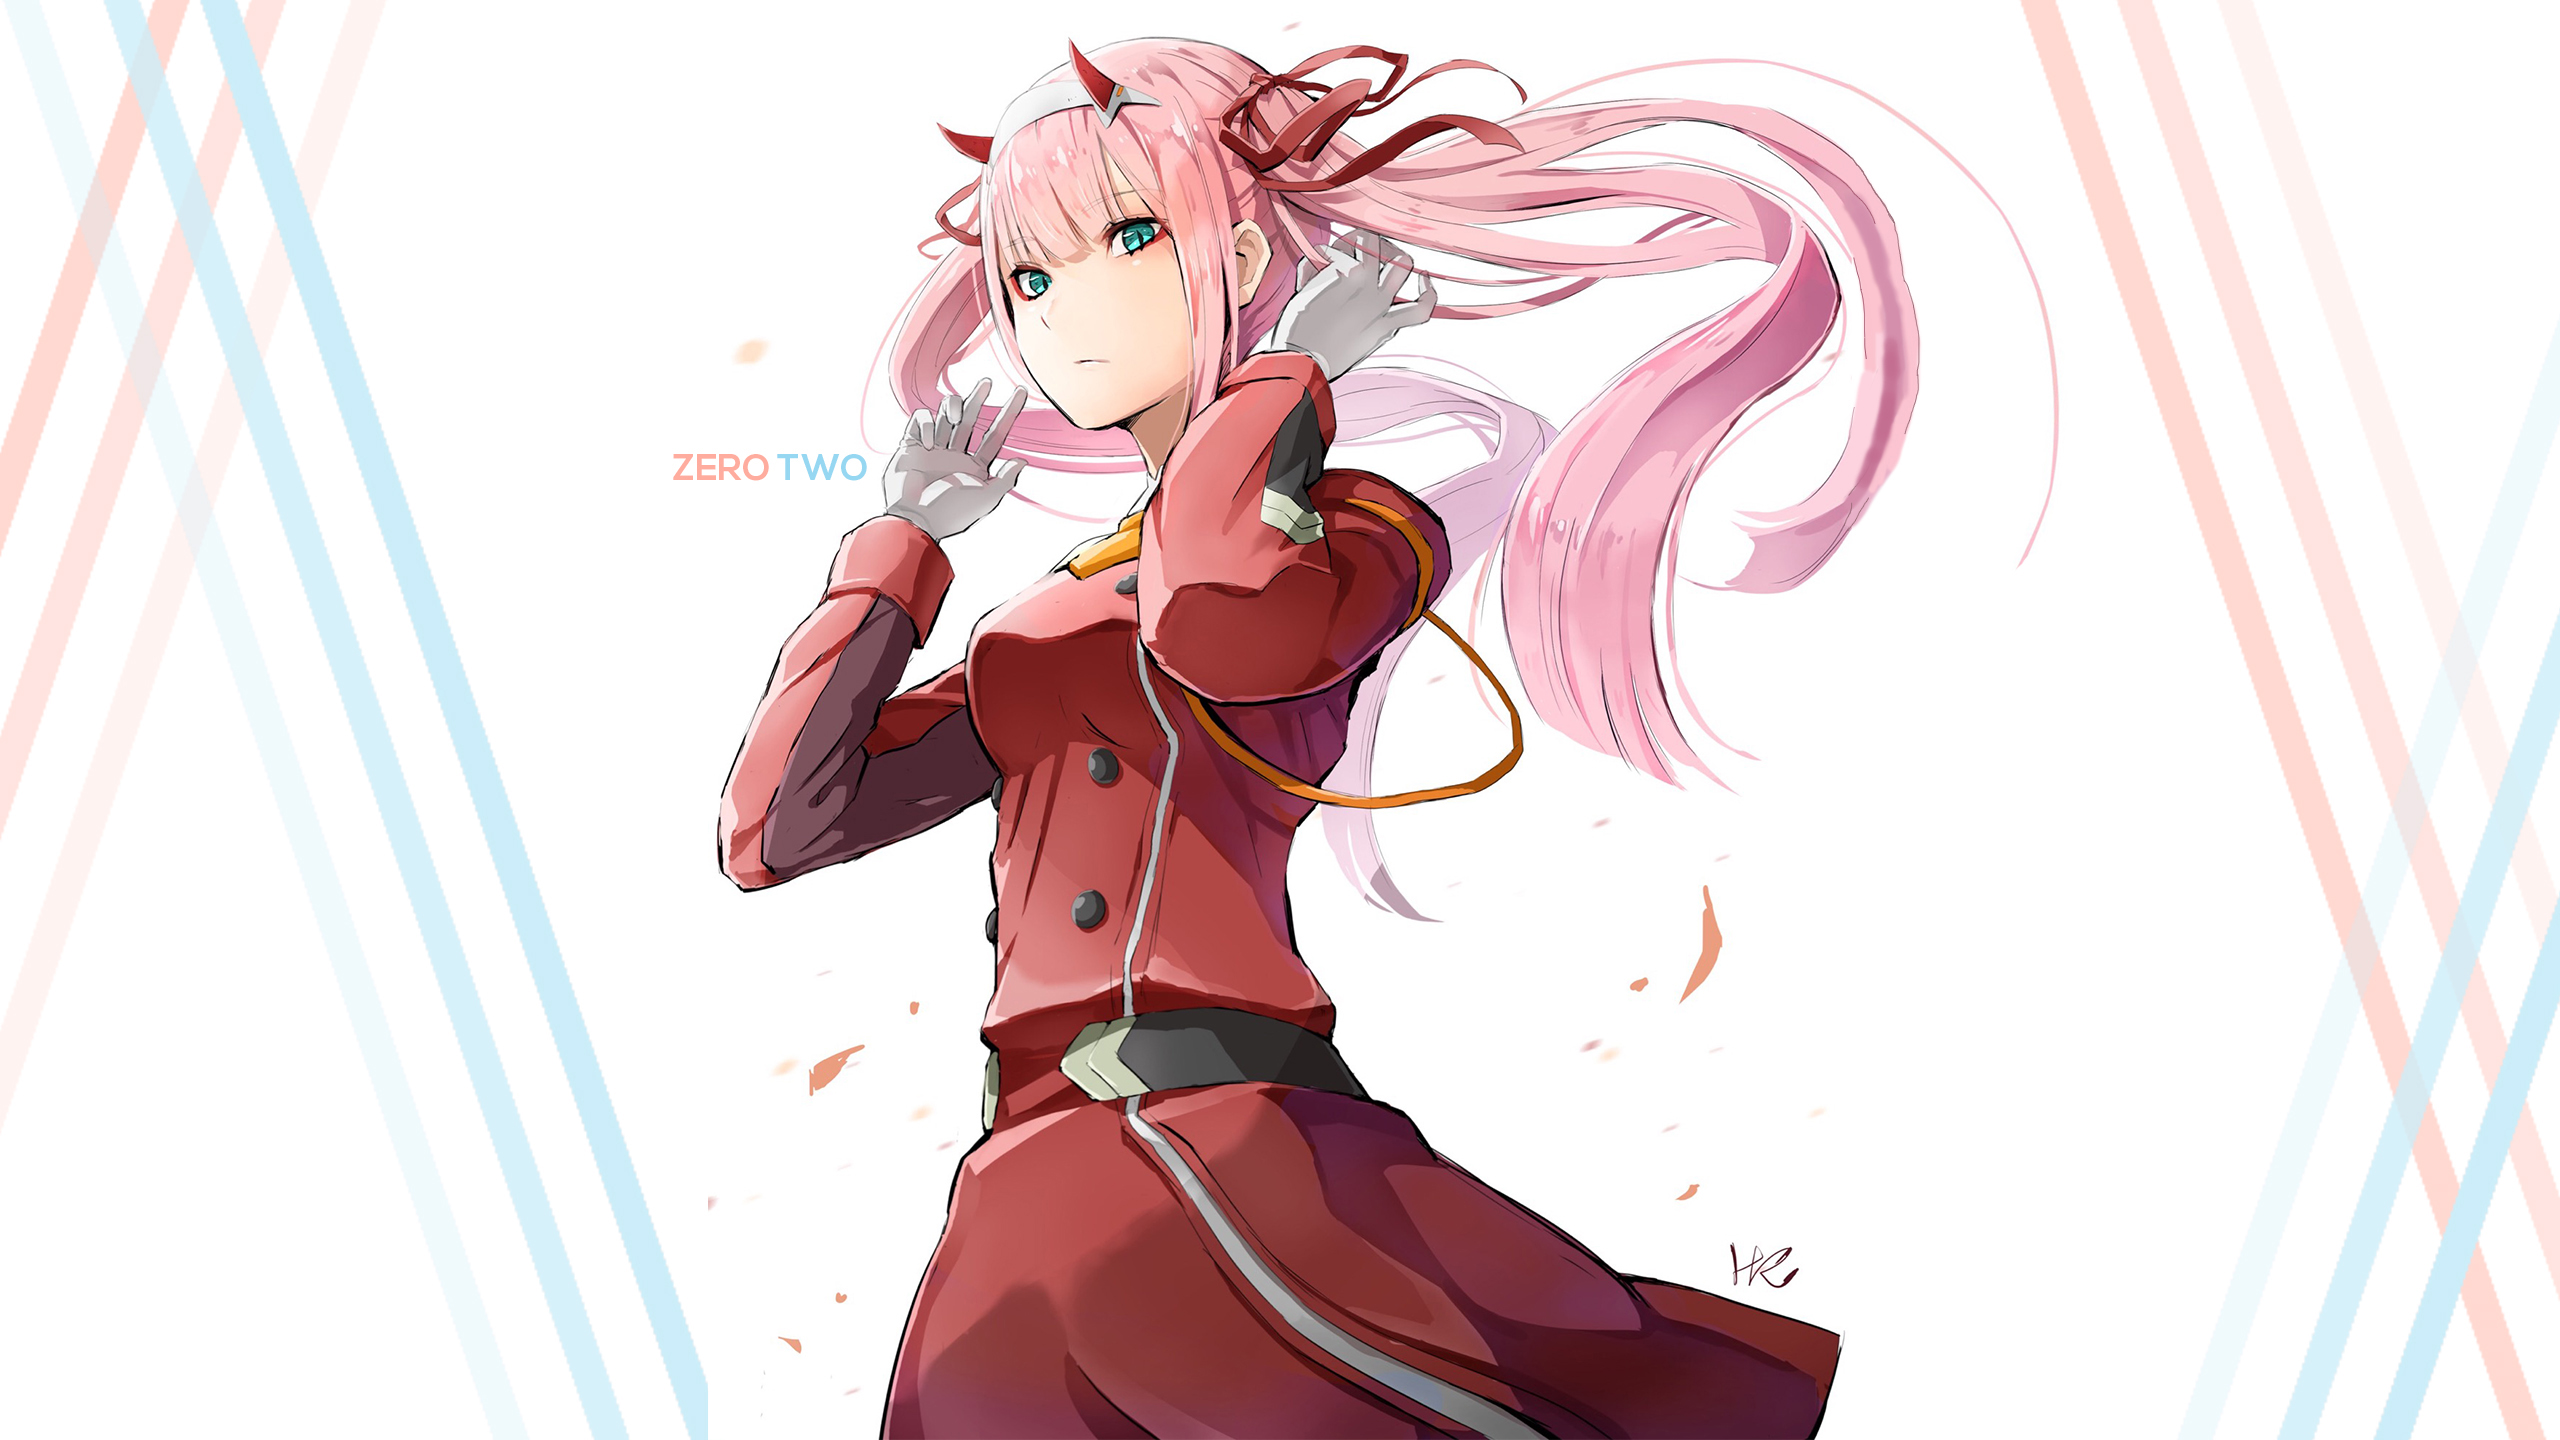 Darling In The FranXX Zero Two Hiro Zero Two With Uncombed Hair With Wallpaper Of White And Cross Lines 2K Anime